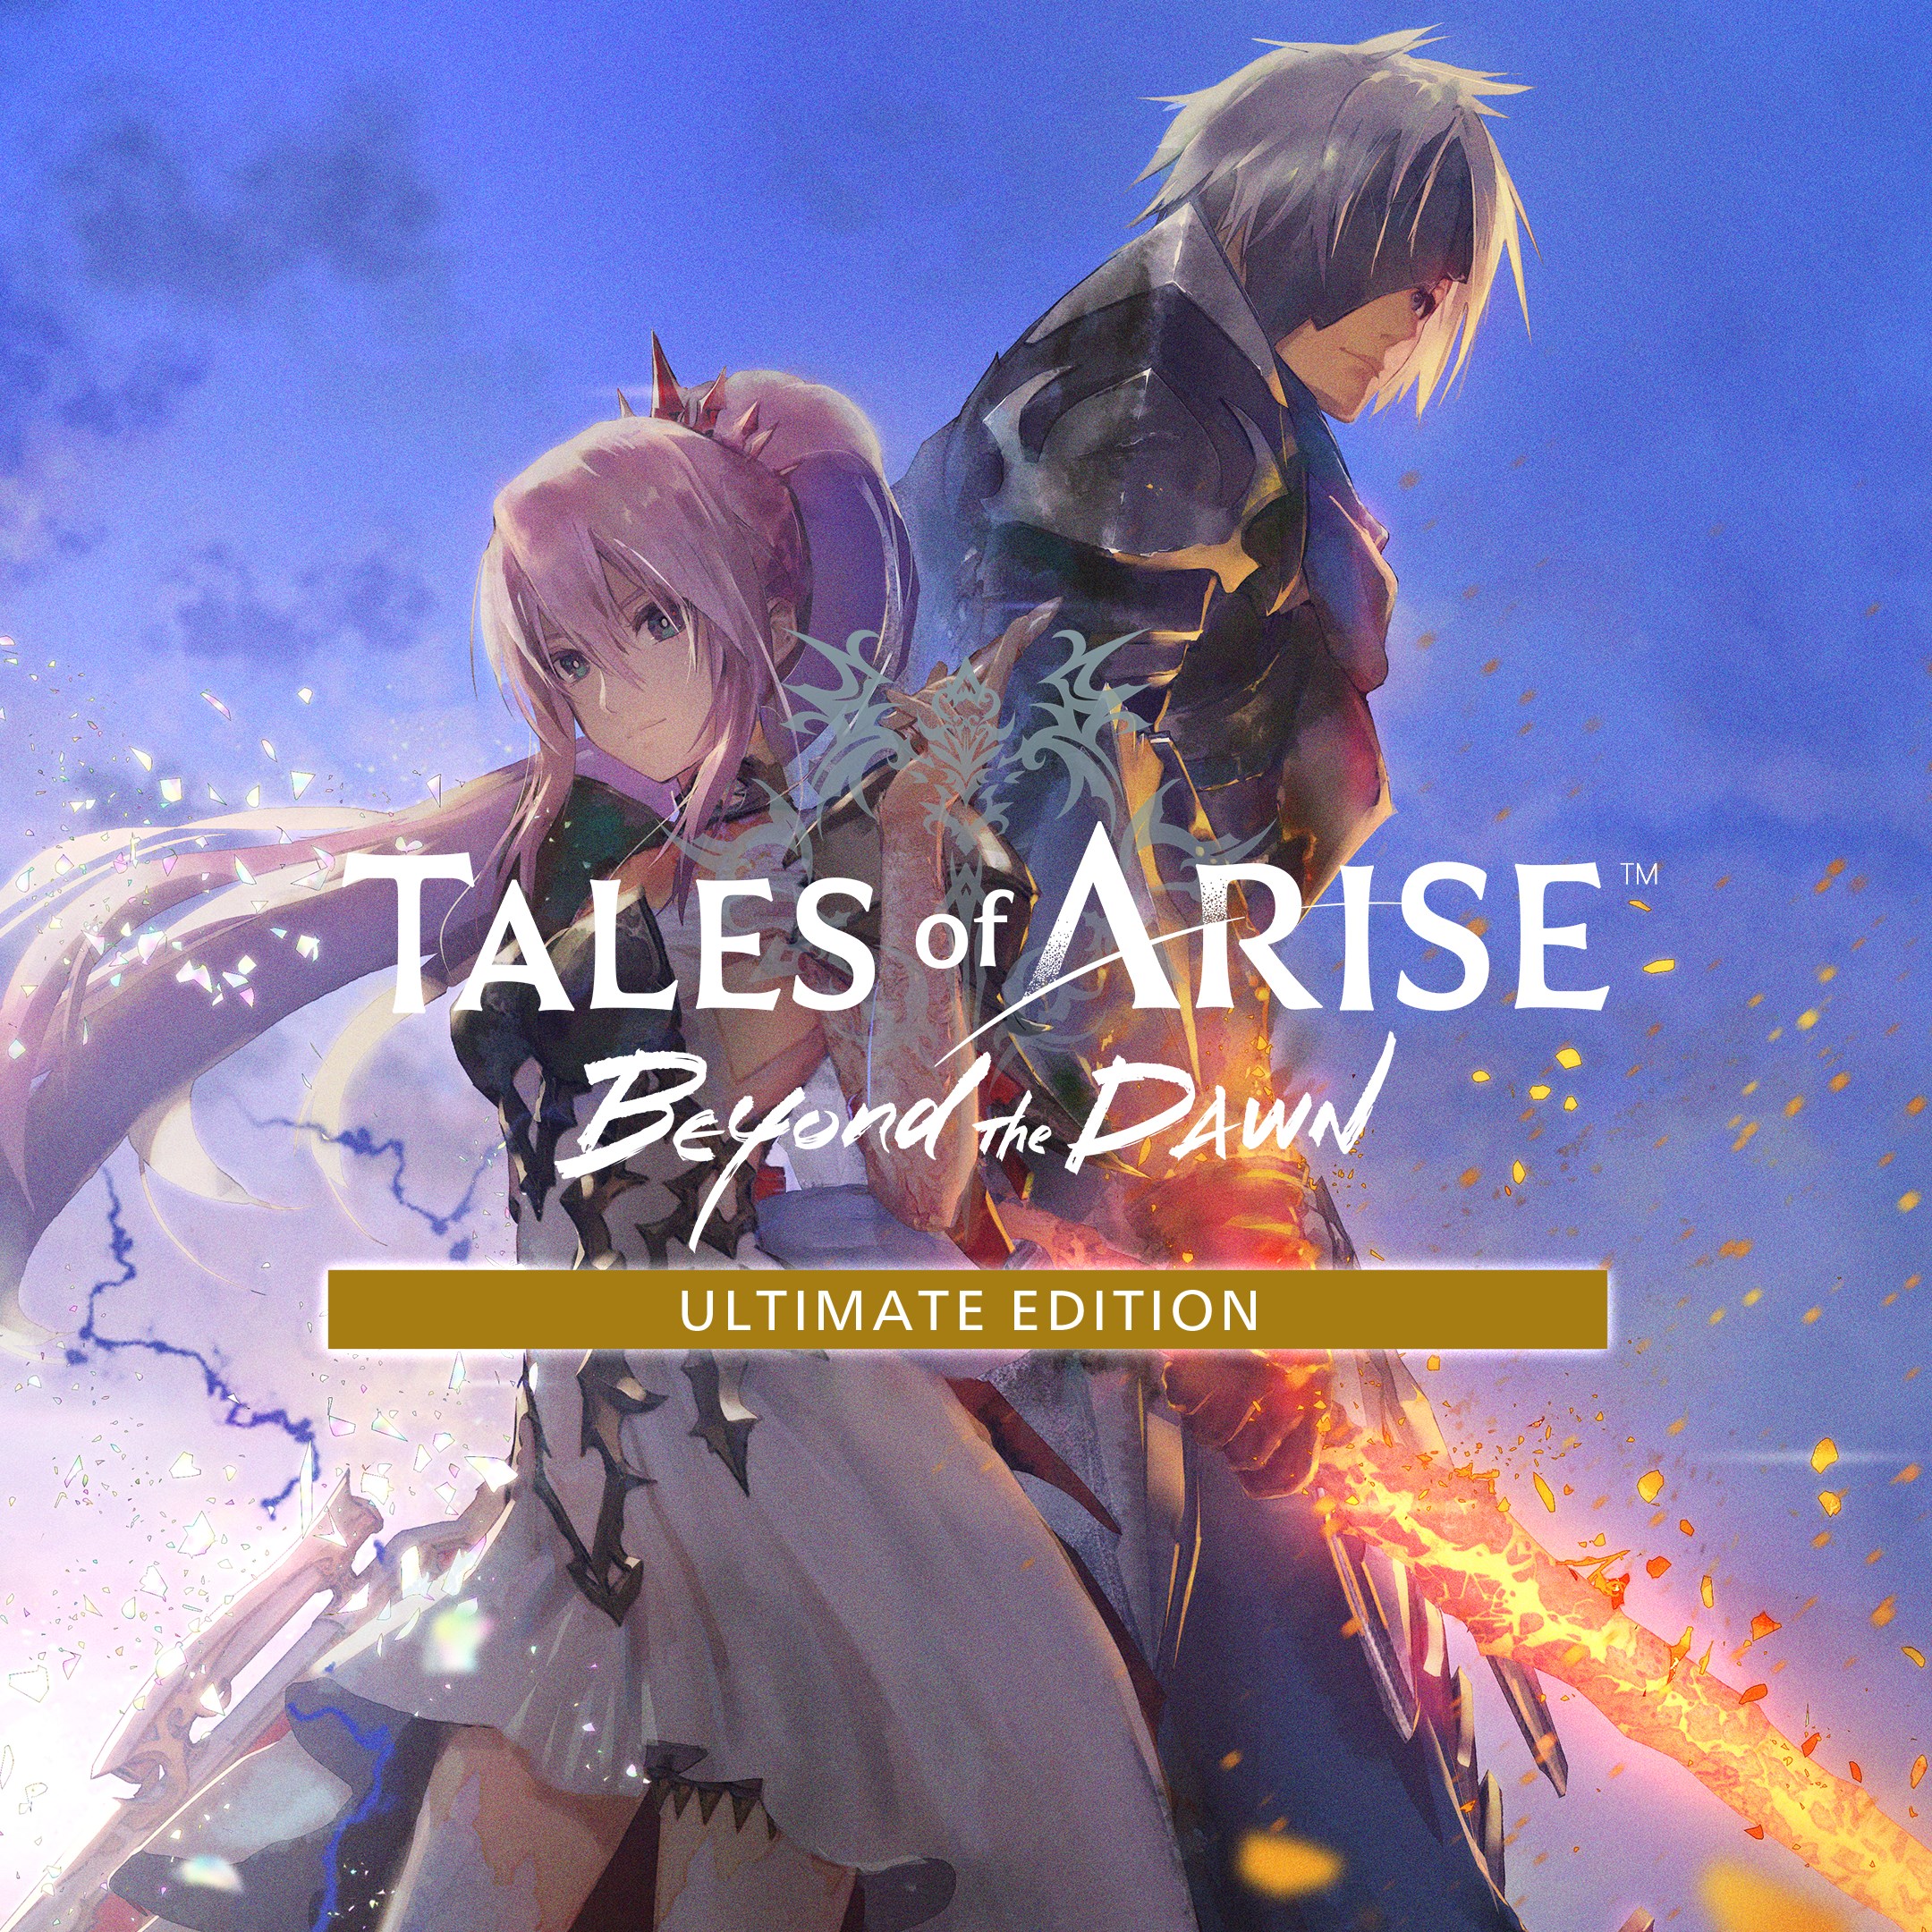 Arise ps4. Tales of Arise: Ultimate Edition. Tales of Arise [ps4]. Tales of Arise Beyond the Dawn. Tales of Arise обложка.